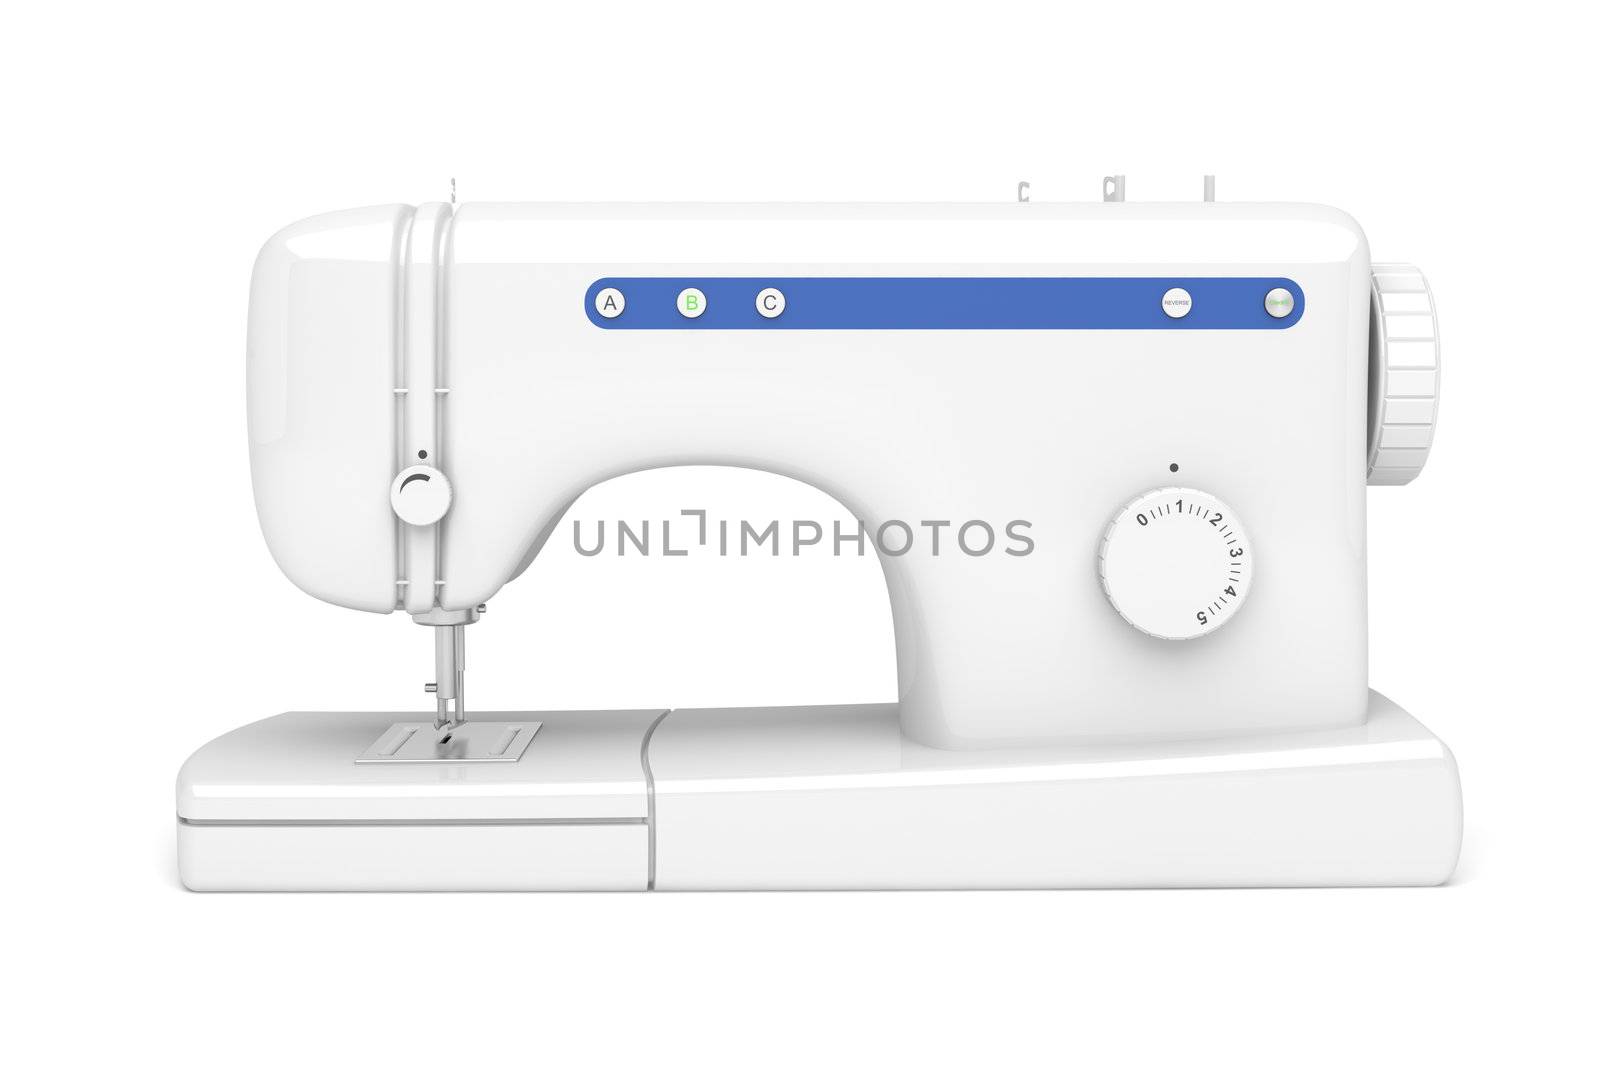 Sewing machine on white background. 3d image.